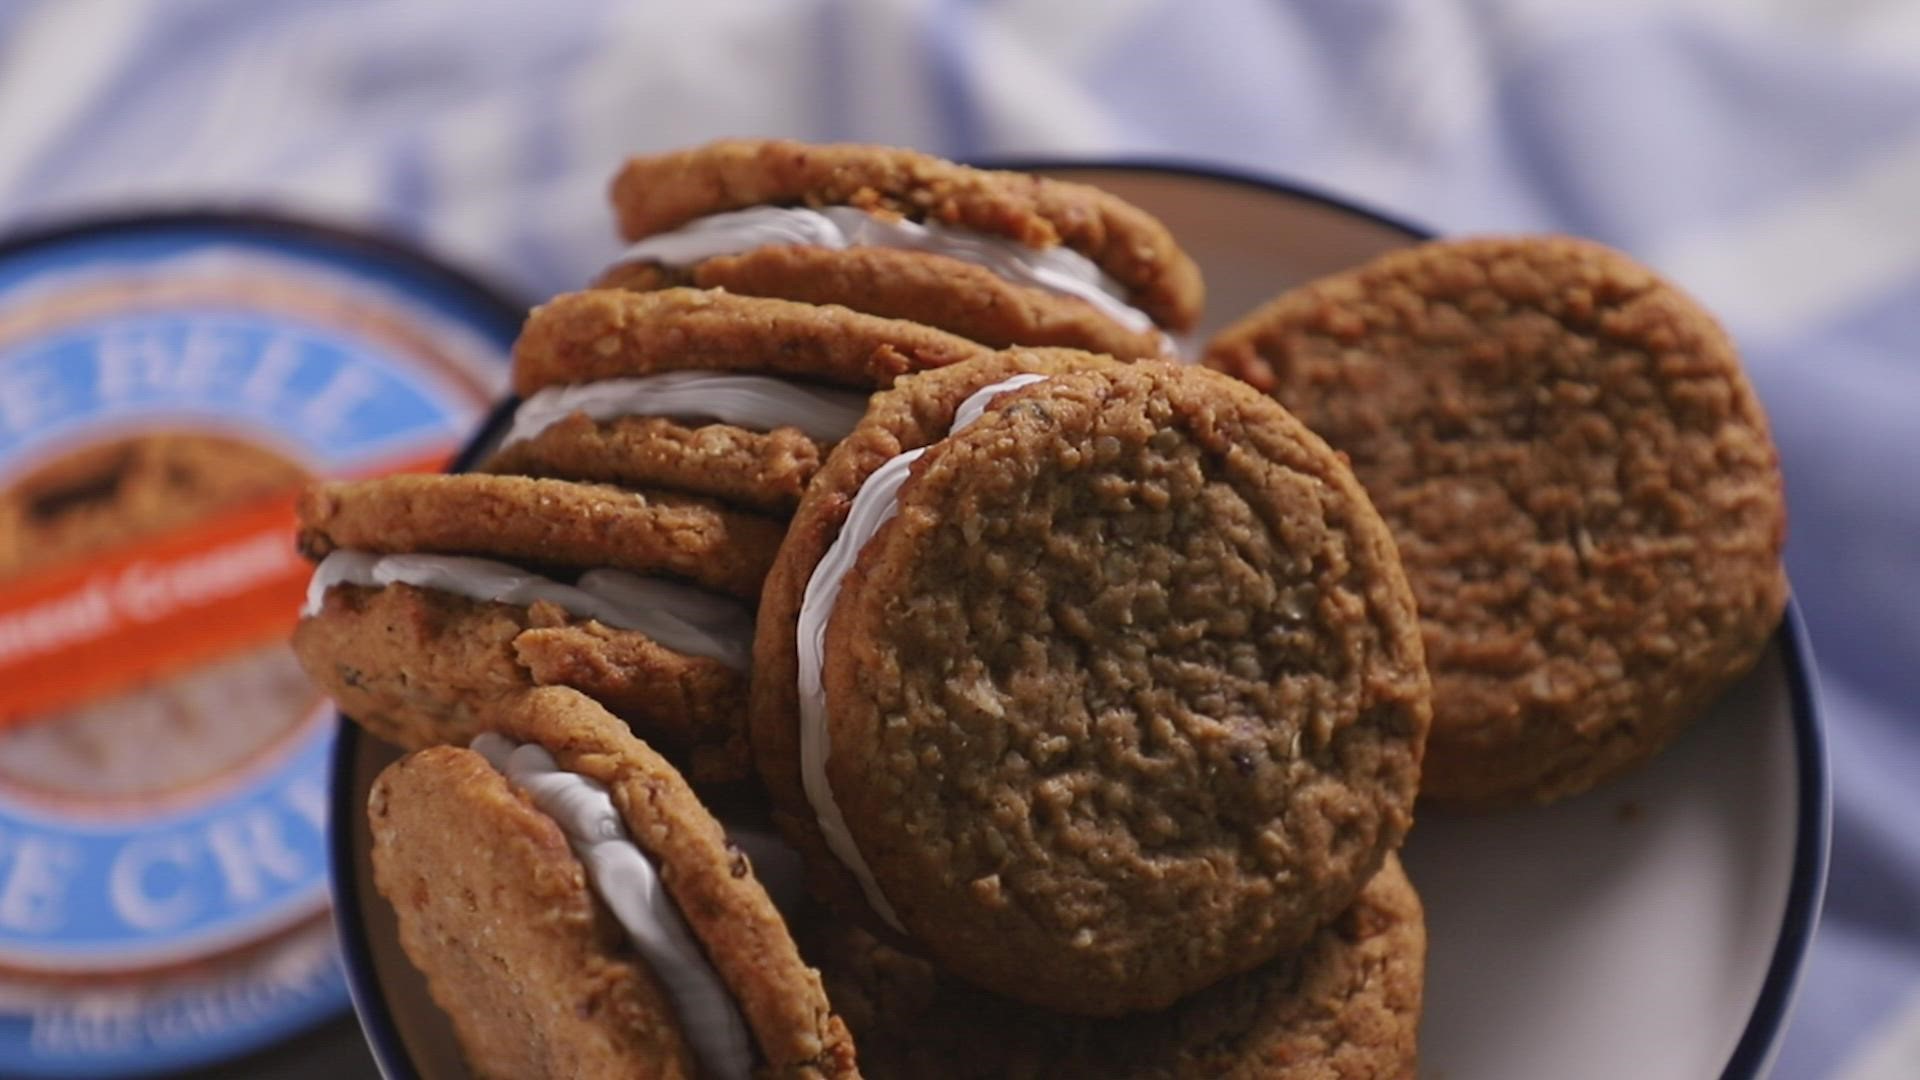 Oatmeal Cream Pie is available in half gallon and pint sizes while supplies last.